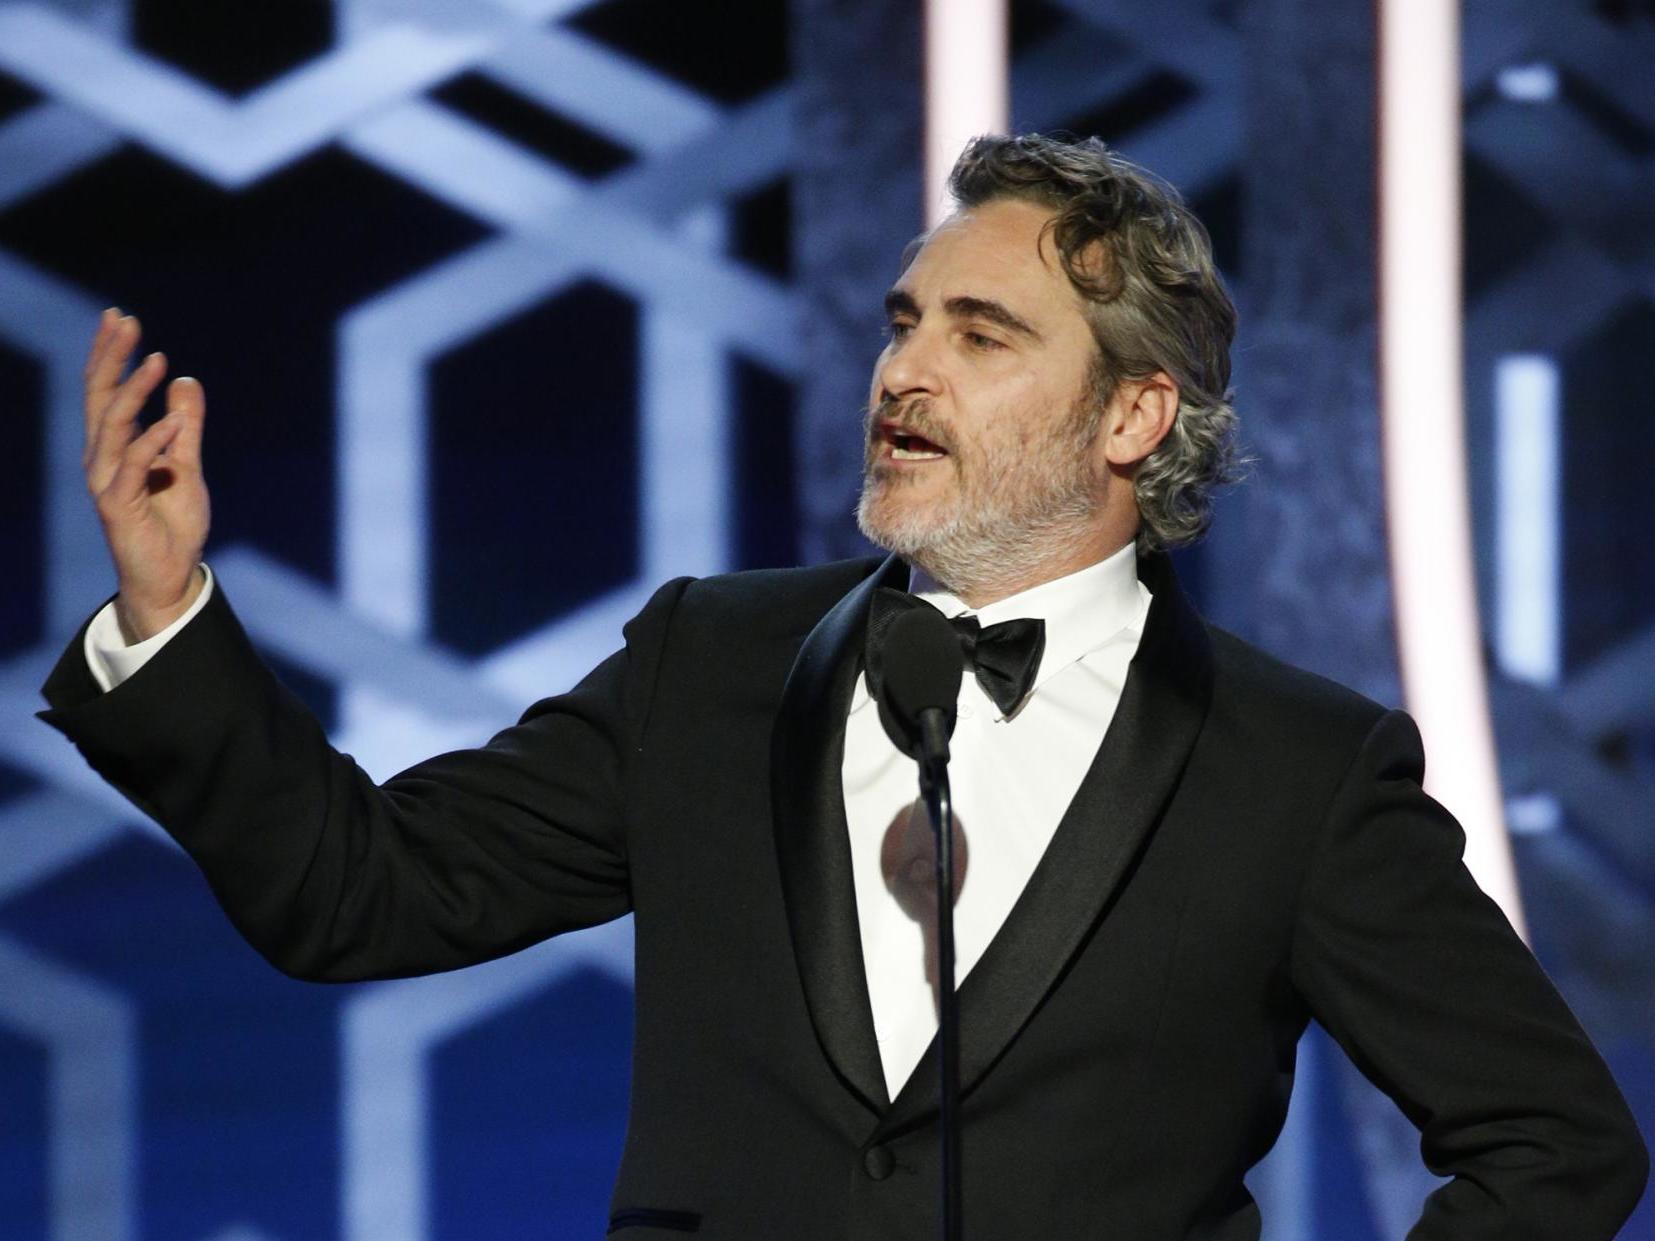 At the Golden Globes, Phoenix implored his fellow actors to stop taking private jets